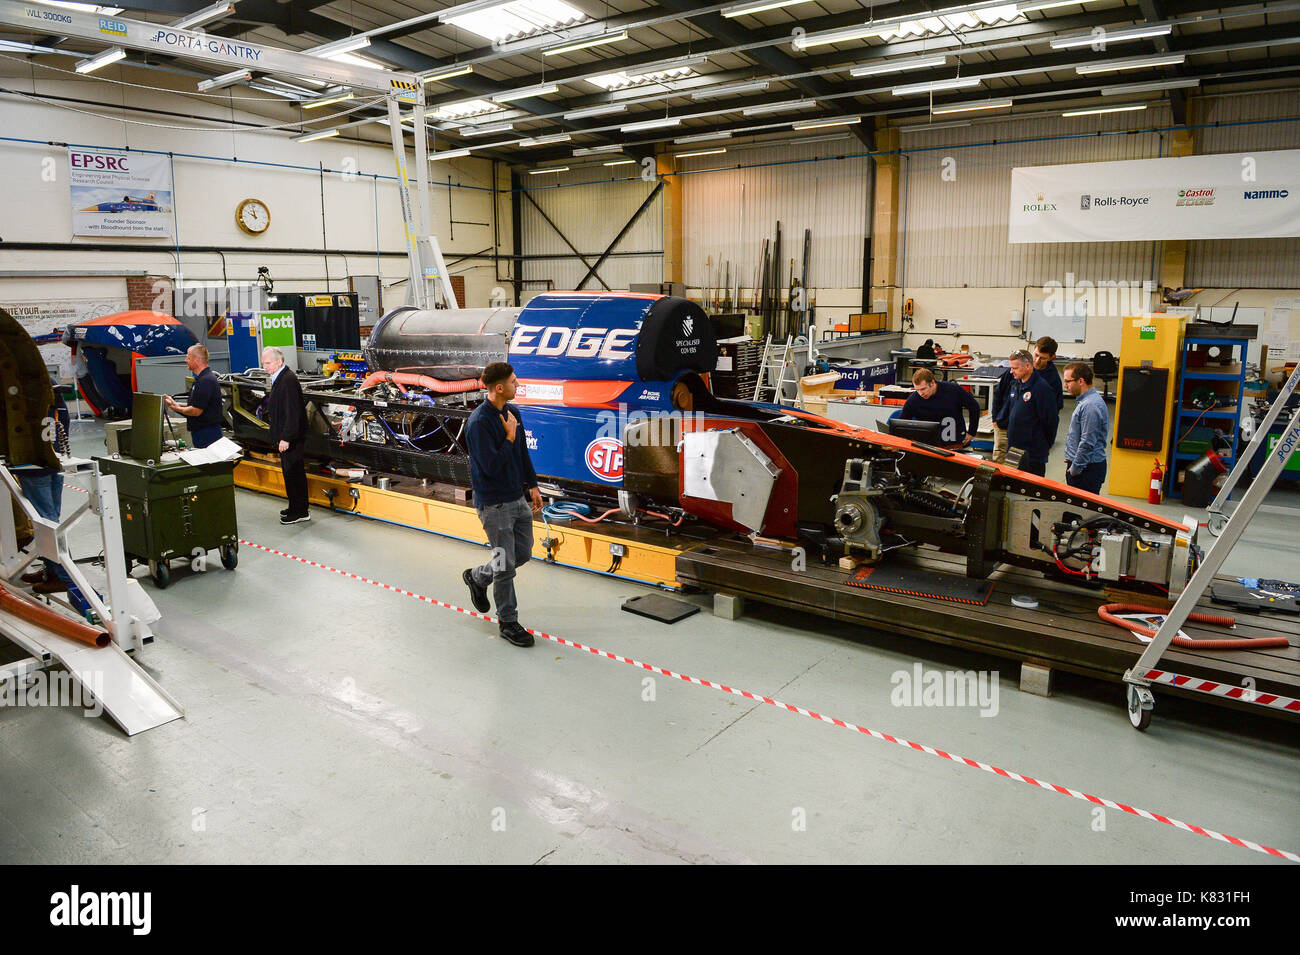 Engineers work on the lower chassis in preparation for mounting the upper chassis, which houses the jet engine, at the Bloodhound Technical Centre in Avonmouth, as the BLOODHOUND SSC car is prepared for testing in Newquay in October. Stock Photo